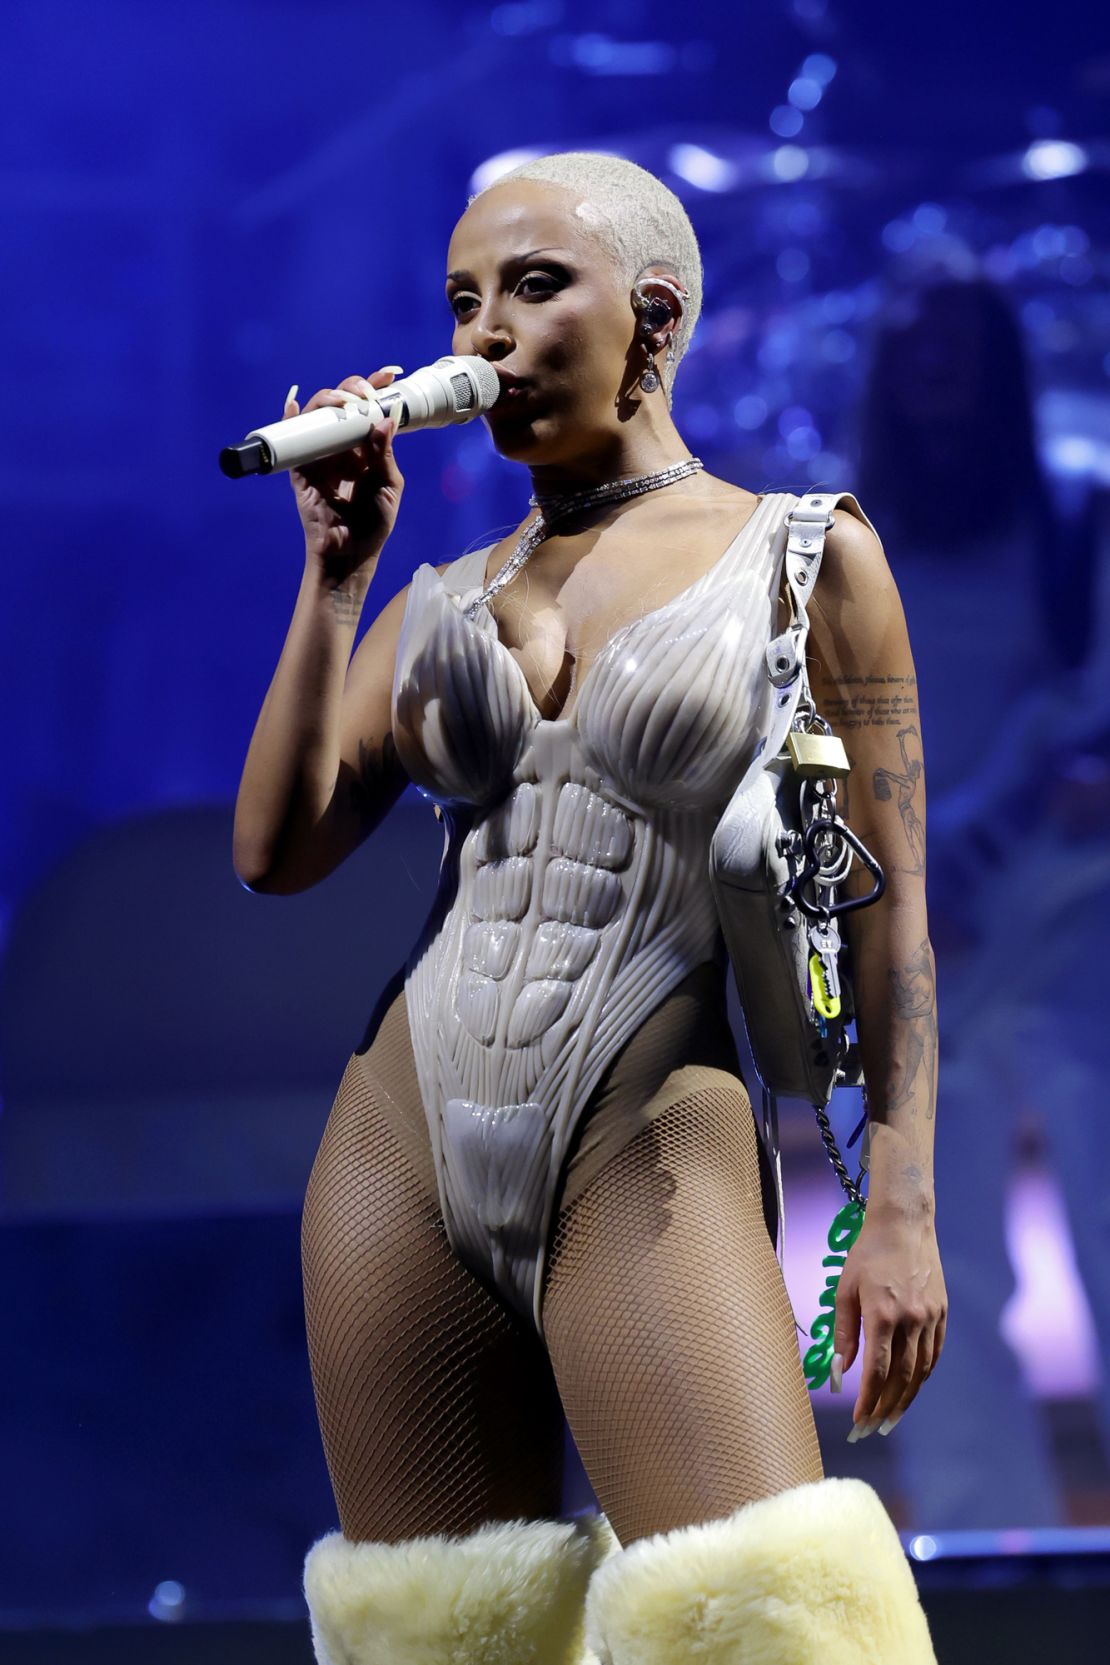 During a costume change in the middle of her set on the second weekend, Doja Cat wore a custom Natasha Zinko muscular body suit and furry over-the-knee boots.